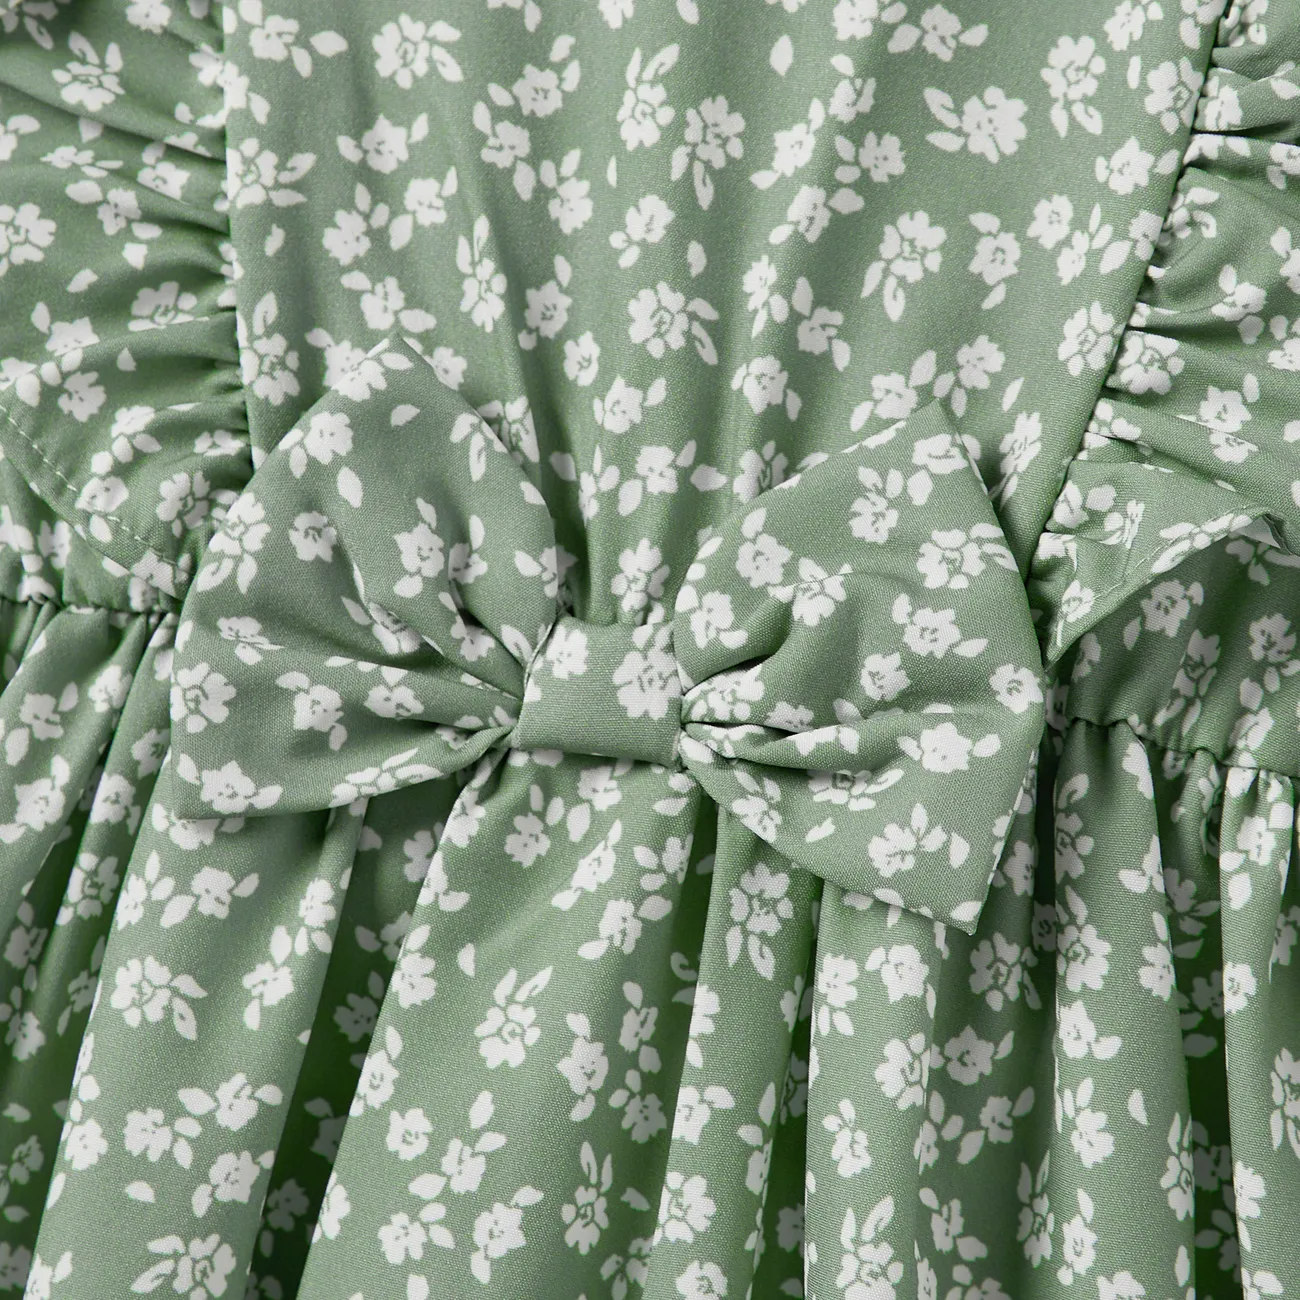 Family Matching Color Block Tee and Ditsy Floral Tie Side Strap Dress Sets greenwhite big image 1